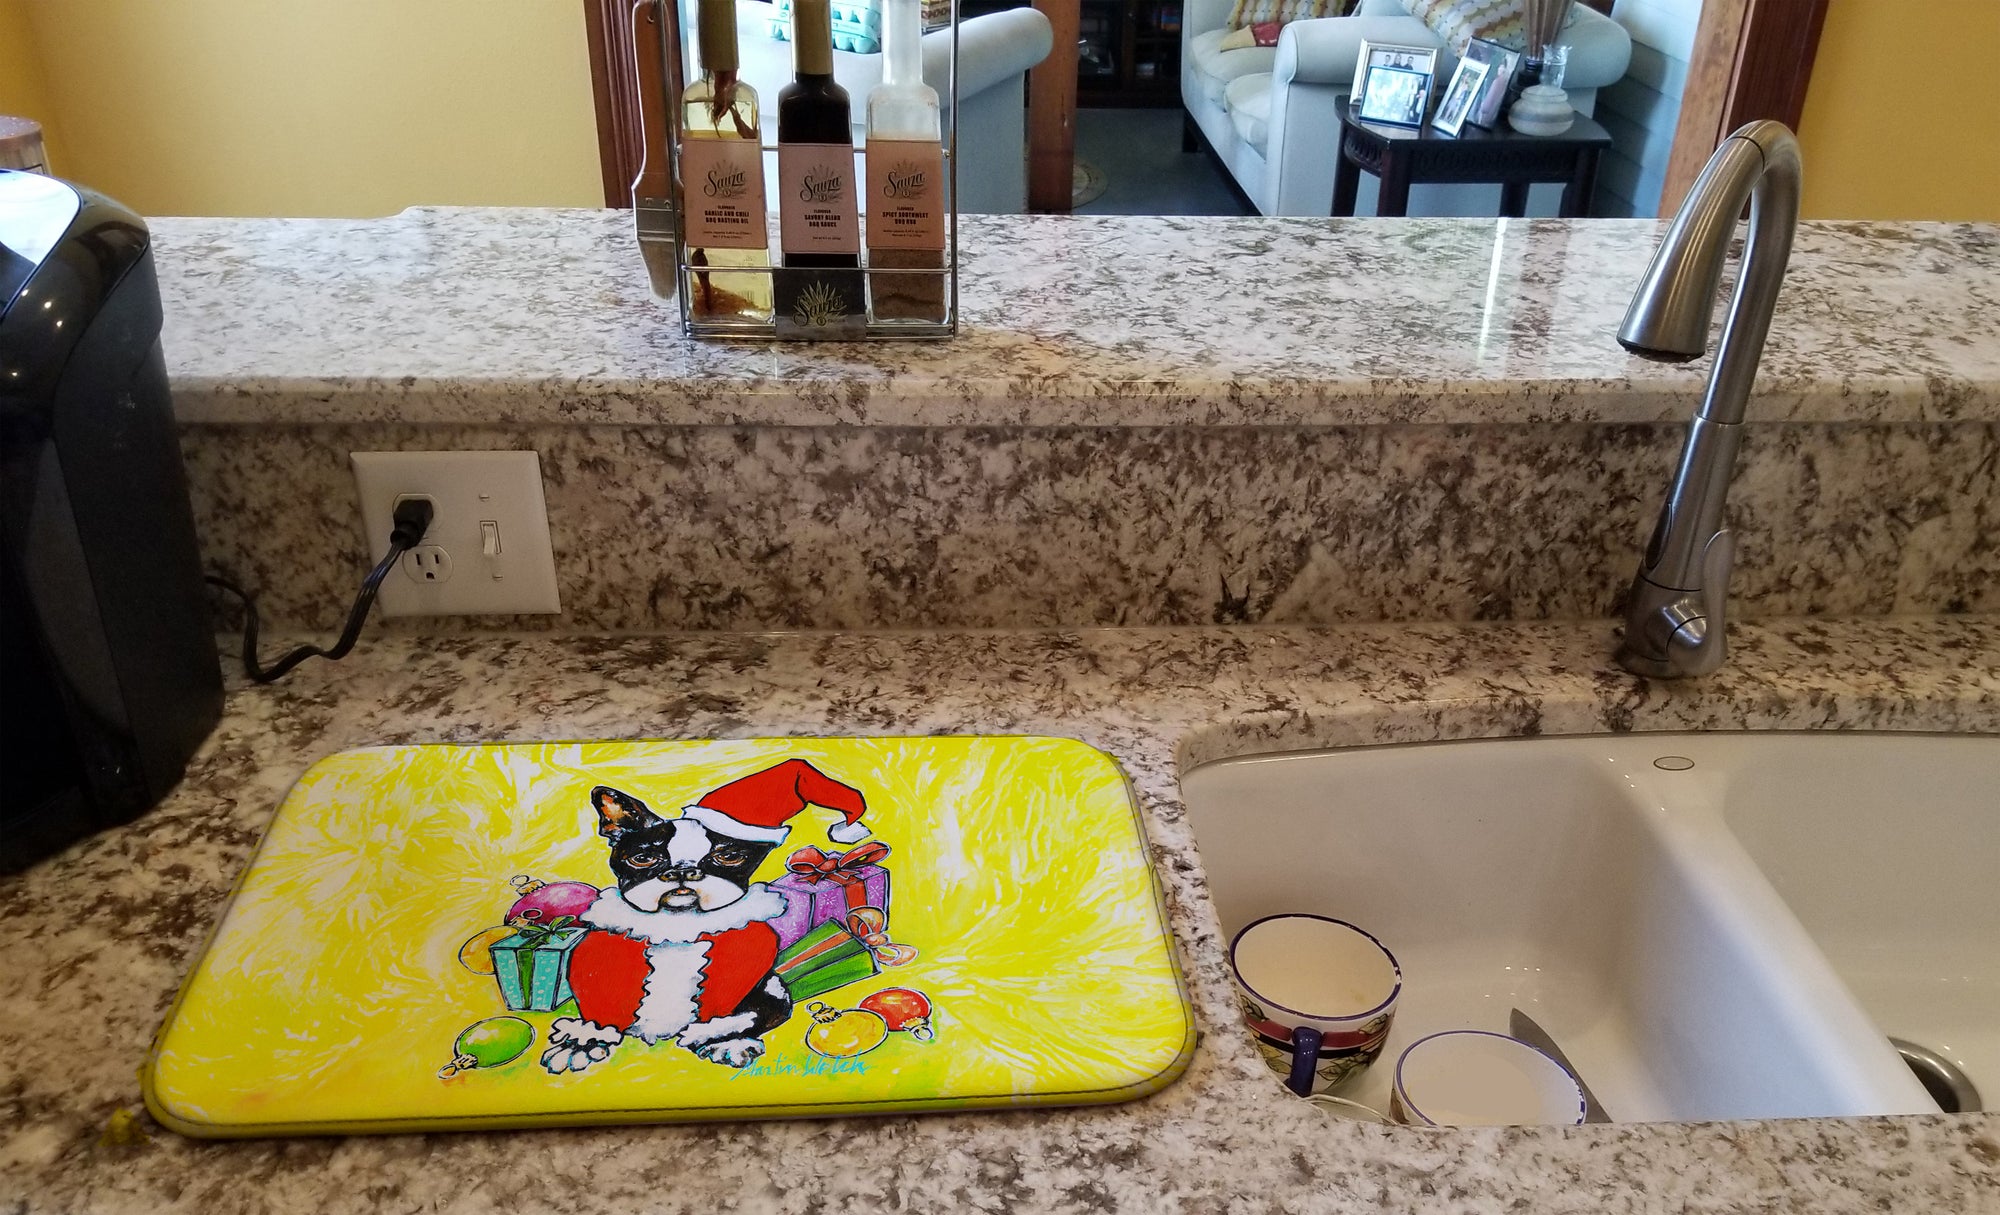 Buy this Boston Terrier Stinker That Stole Christmas Dish Drying Mat